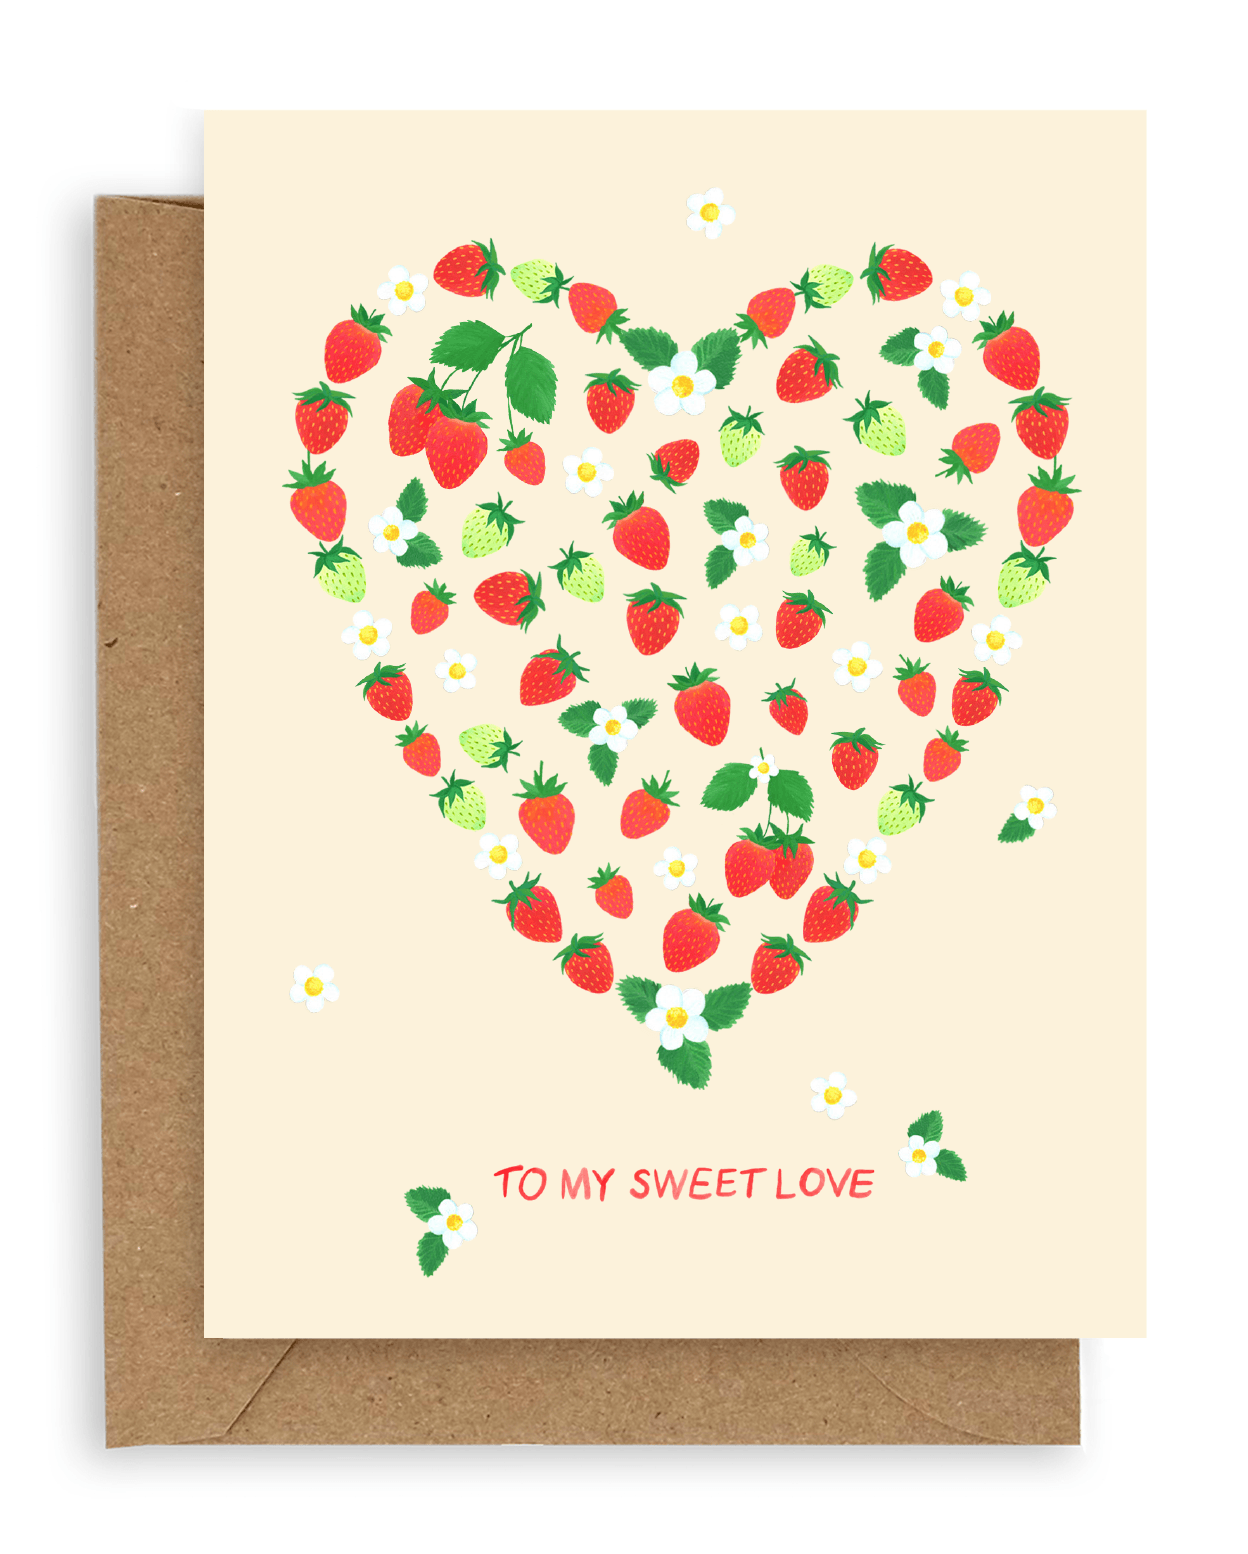 Red and green strawberries with white flowers arranged in a heart shape above the words &quot;to my sweet love&quot; in red font printed on a cream background. Shown with kraft envelope.